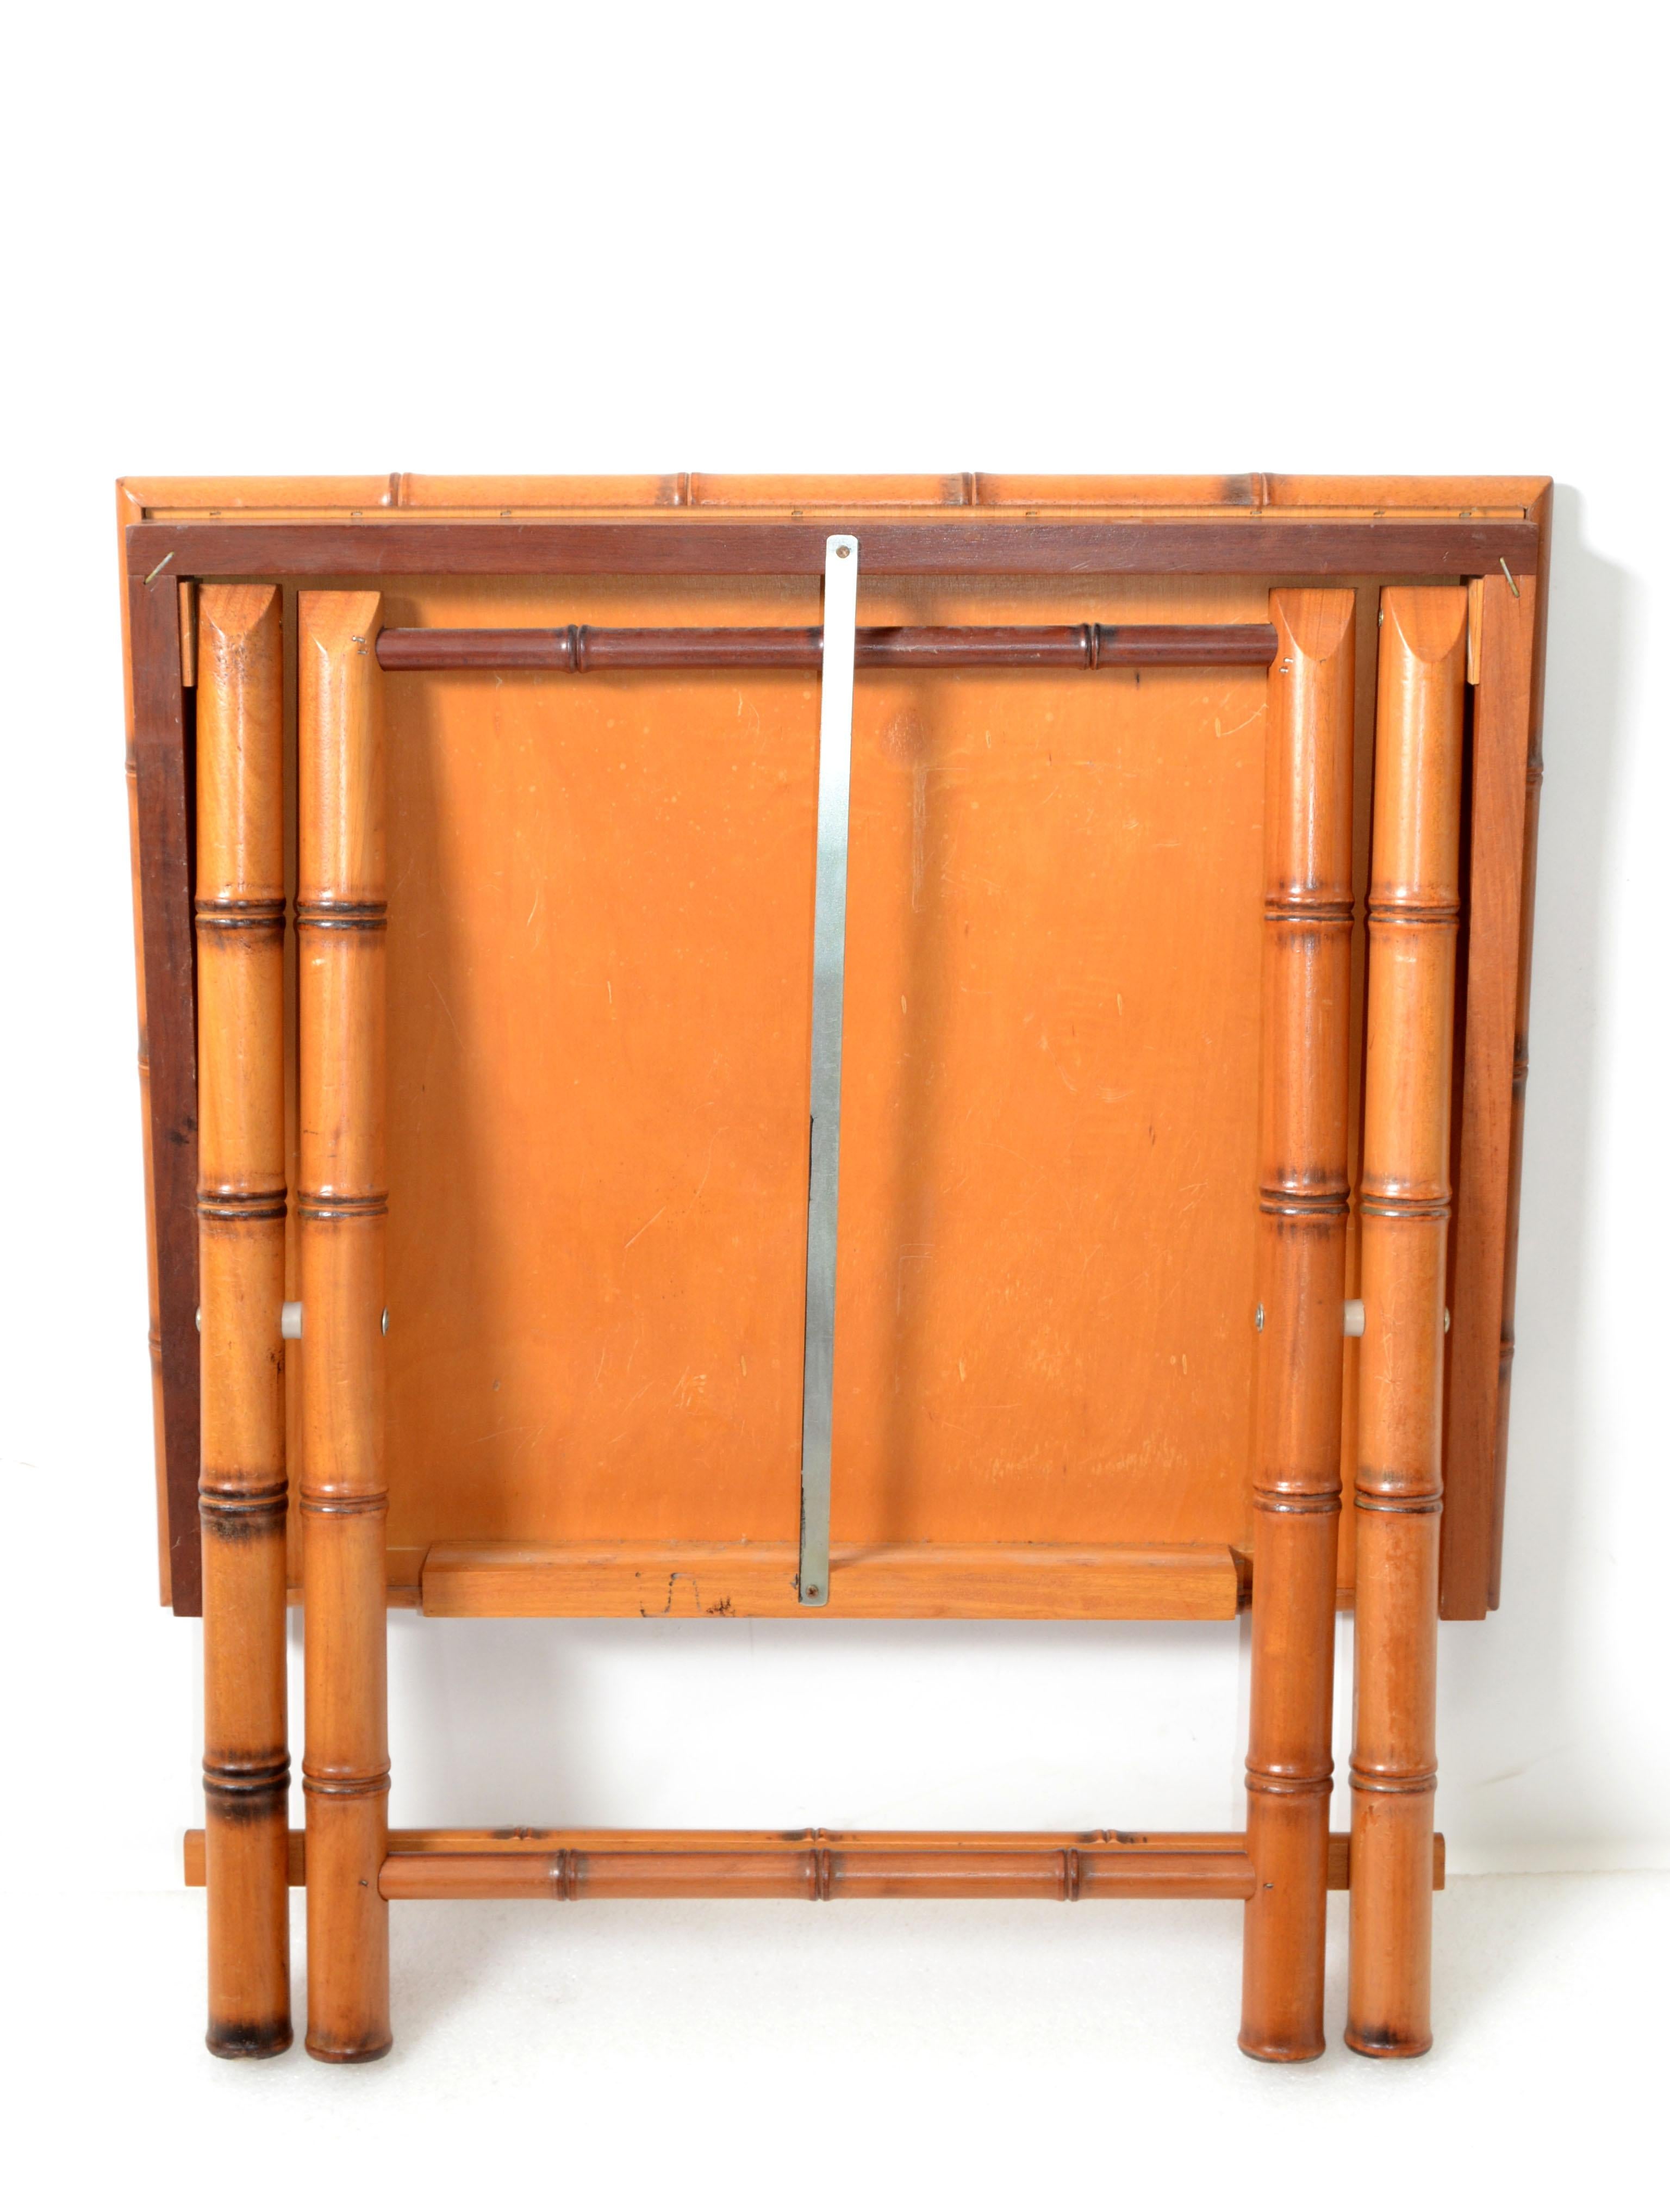 Vintage Handcrafted Rectangle Bamboo Serving Folding Table, Center Table X-Base im Zustand „Gut“ im Angebot in Miami, FL